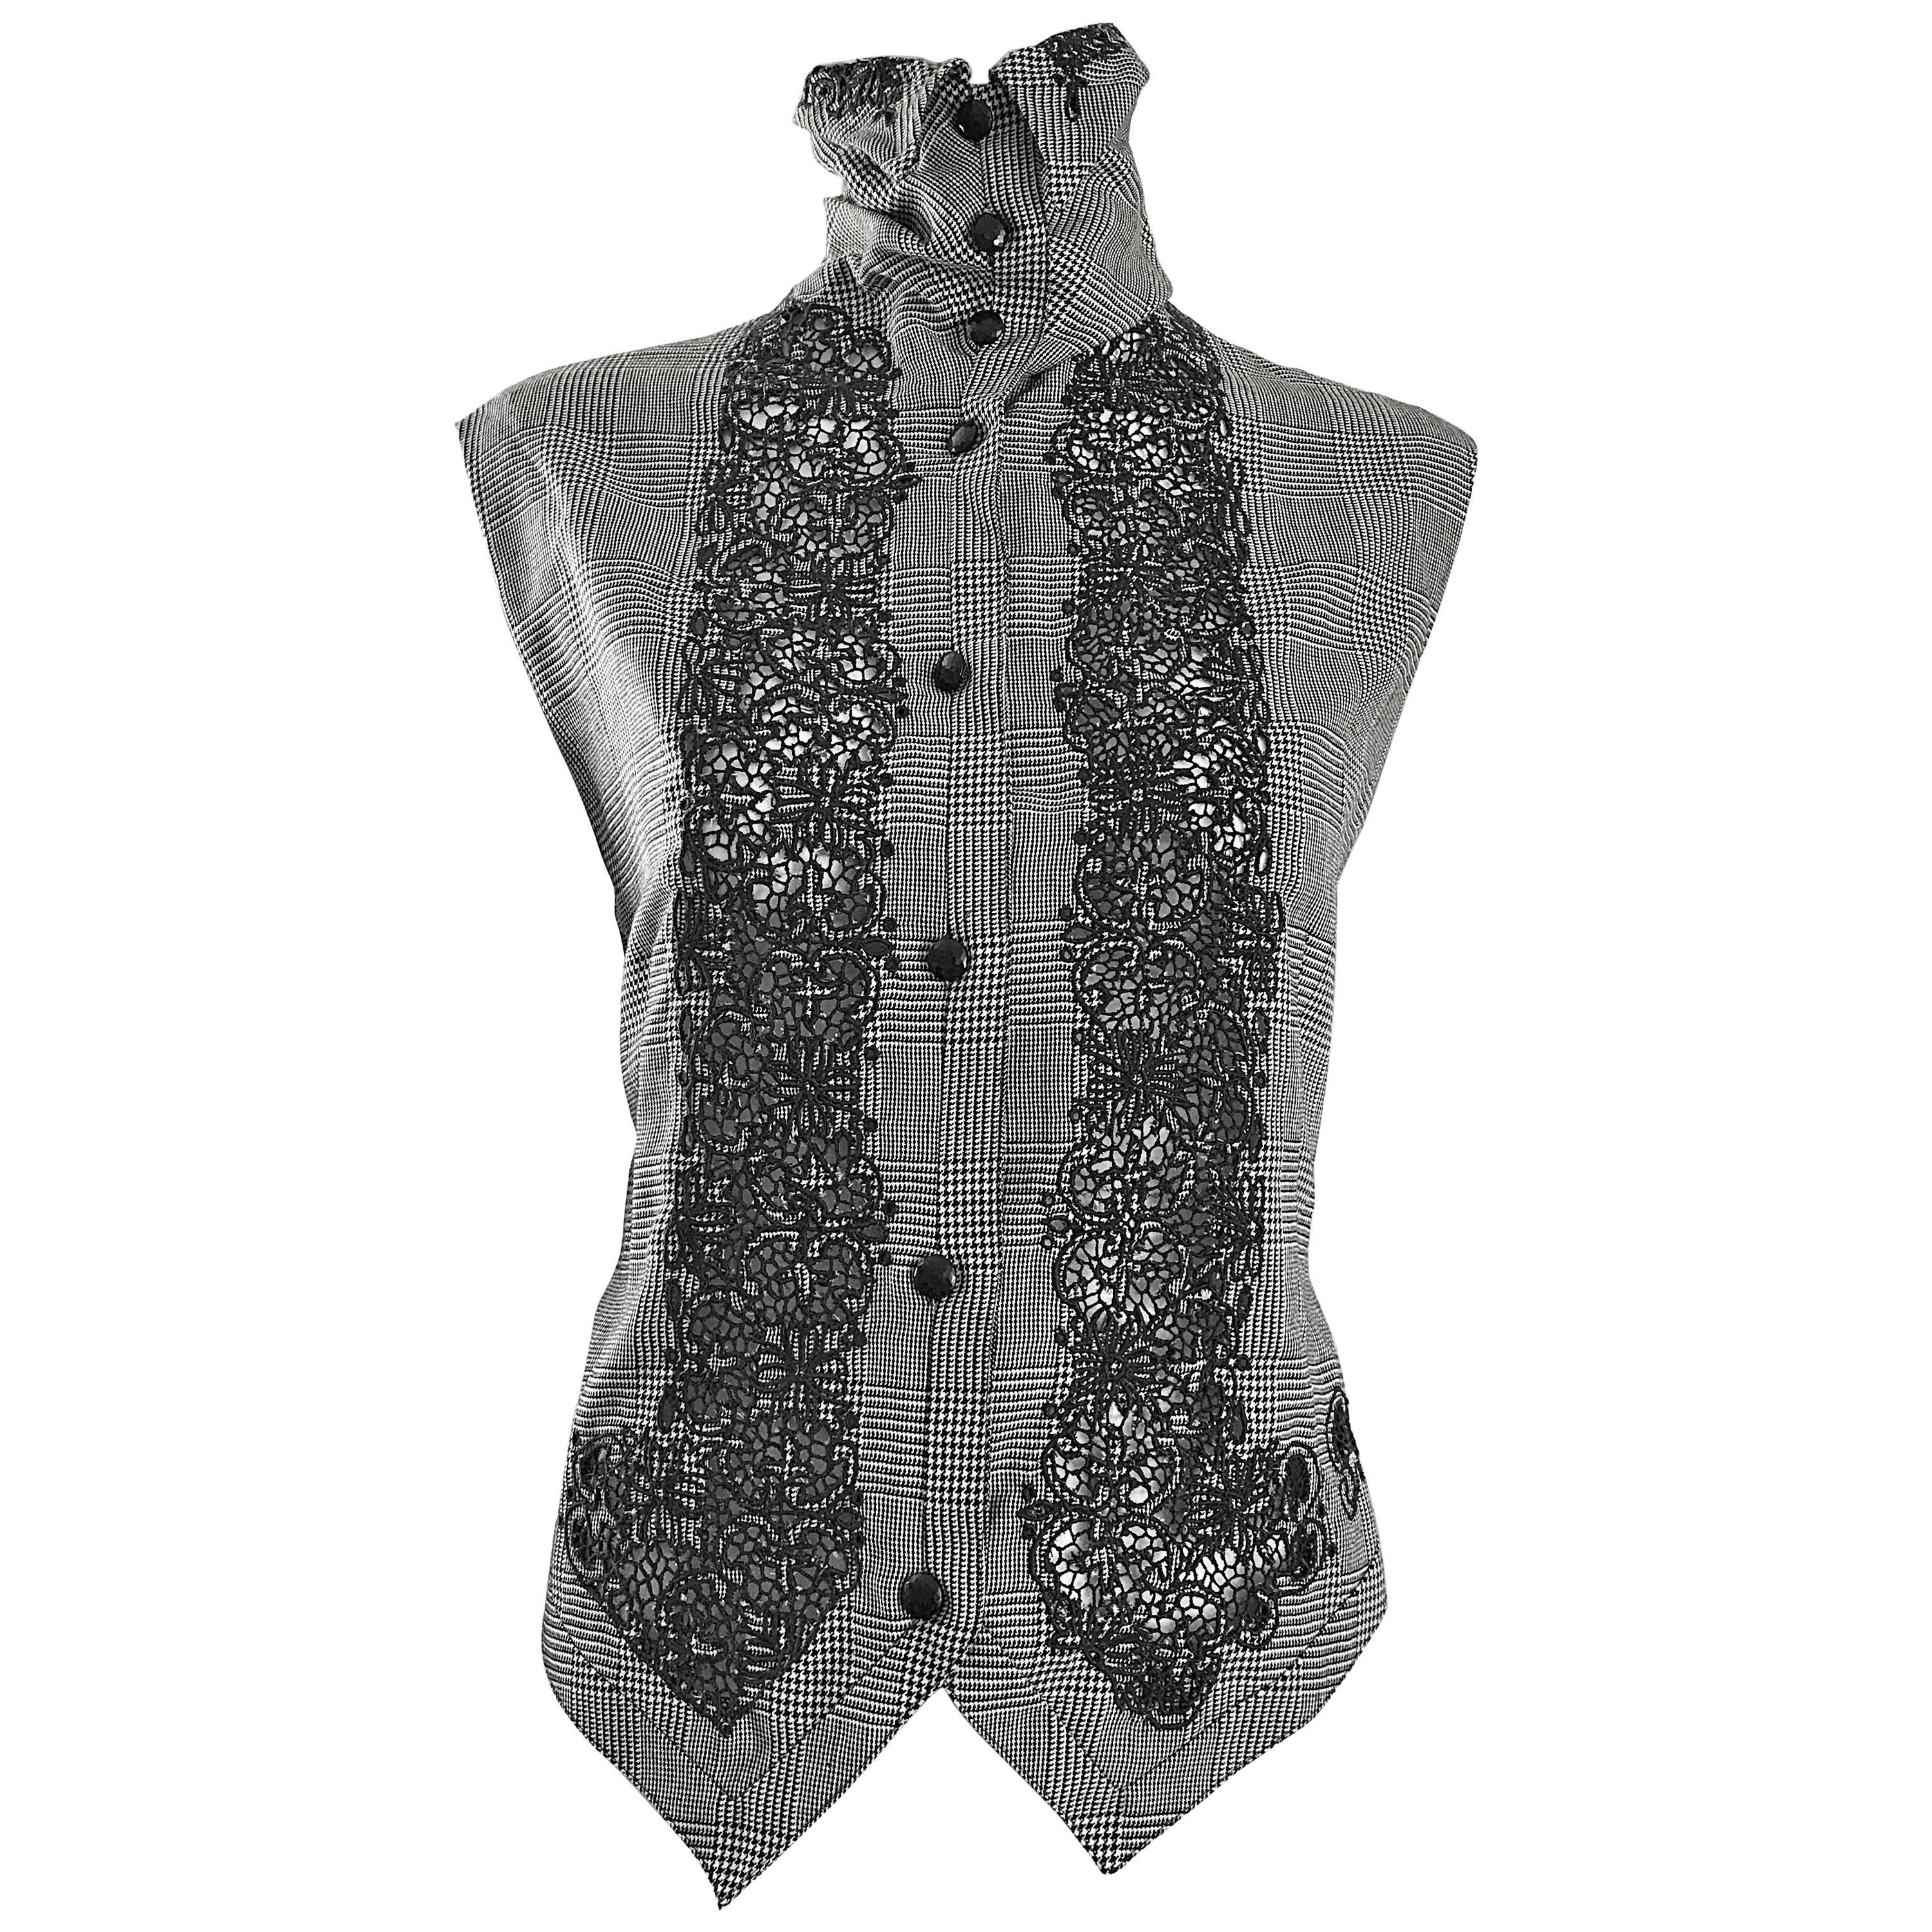 Rare Early Gianni Versace Black and White Houndstooth Plaid Embroidered Vest Top For Sale